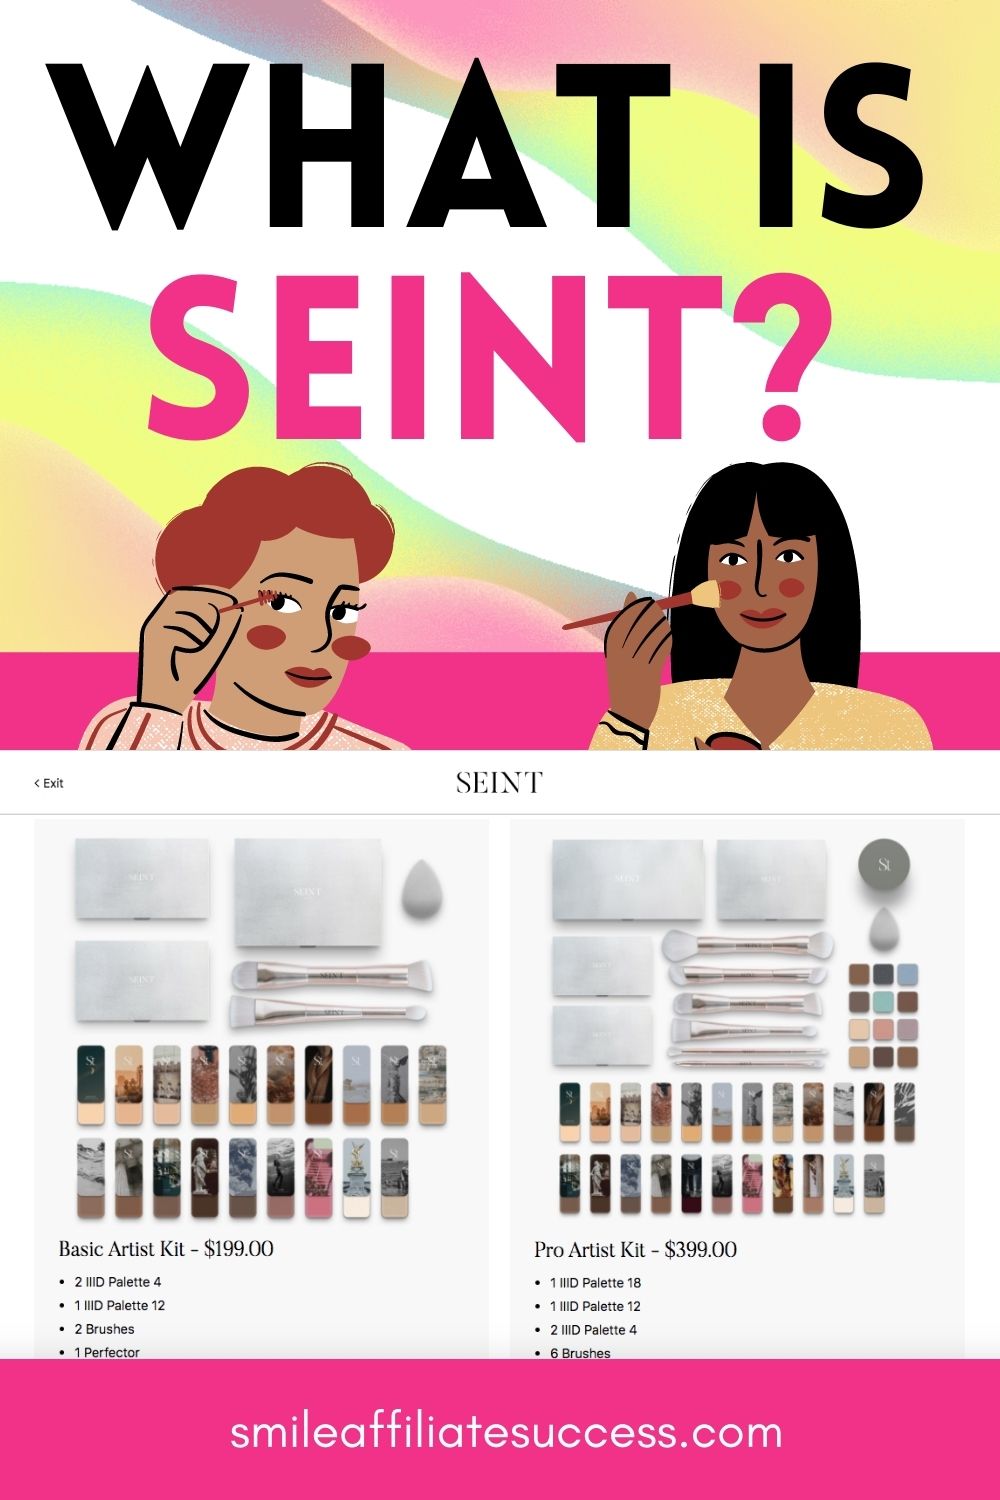 What Is Seint?